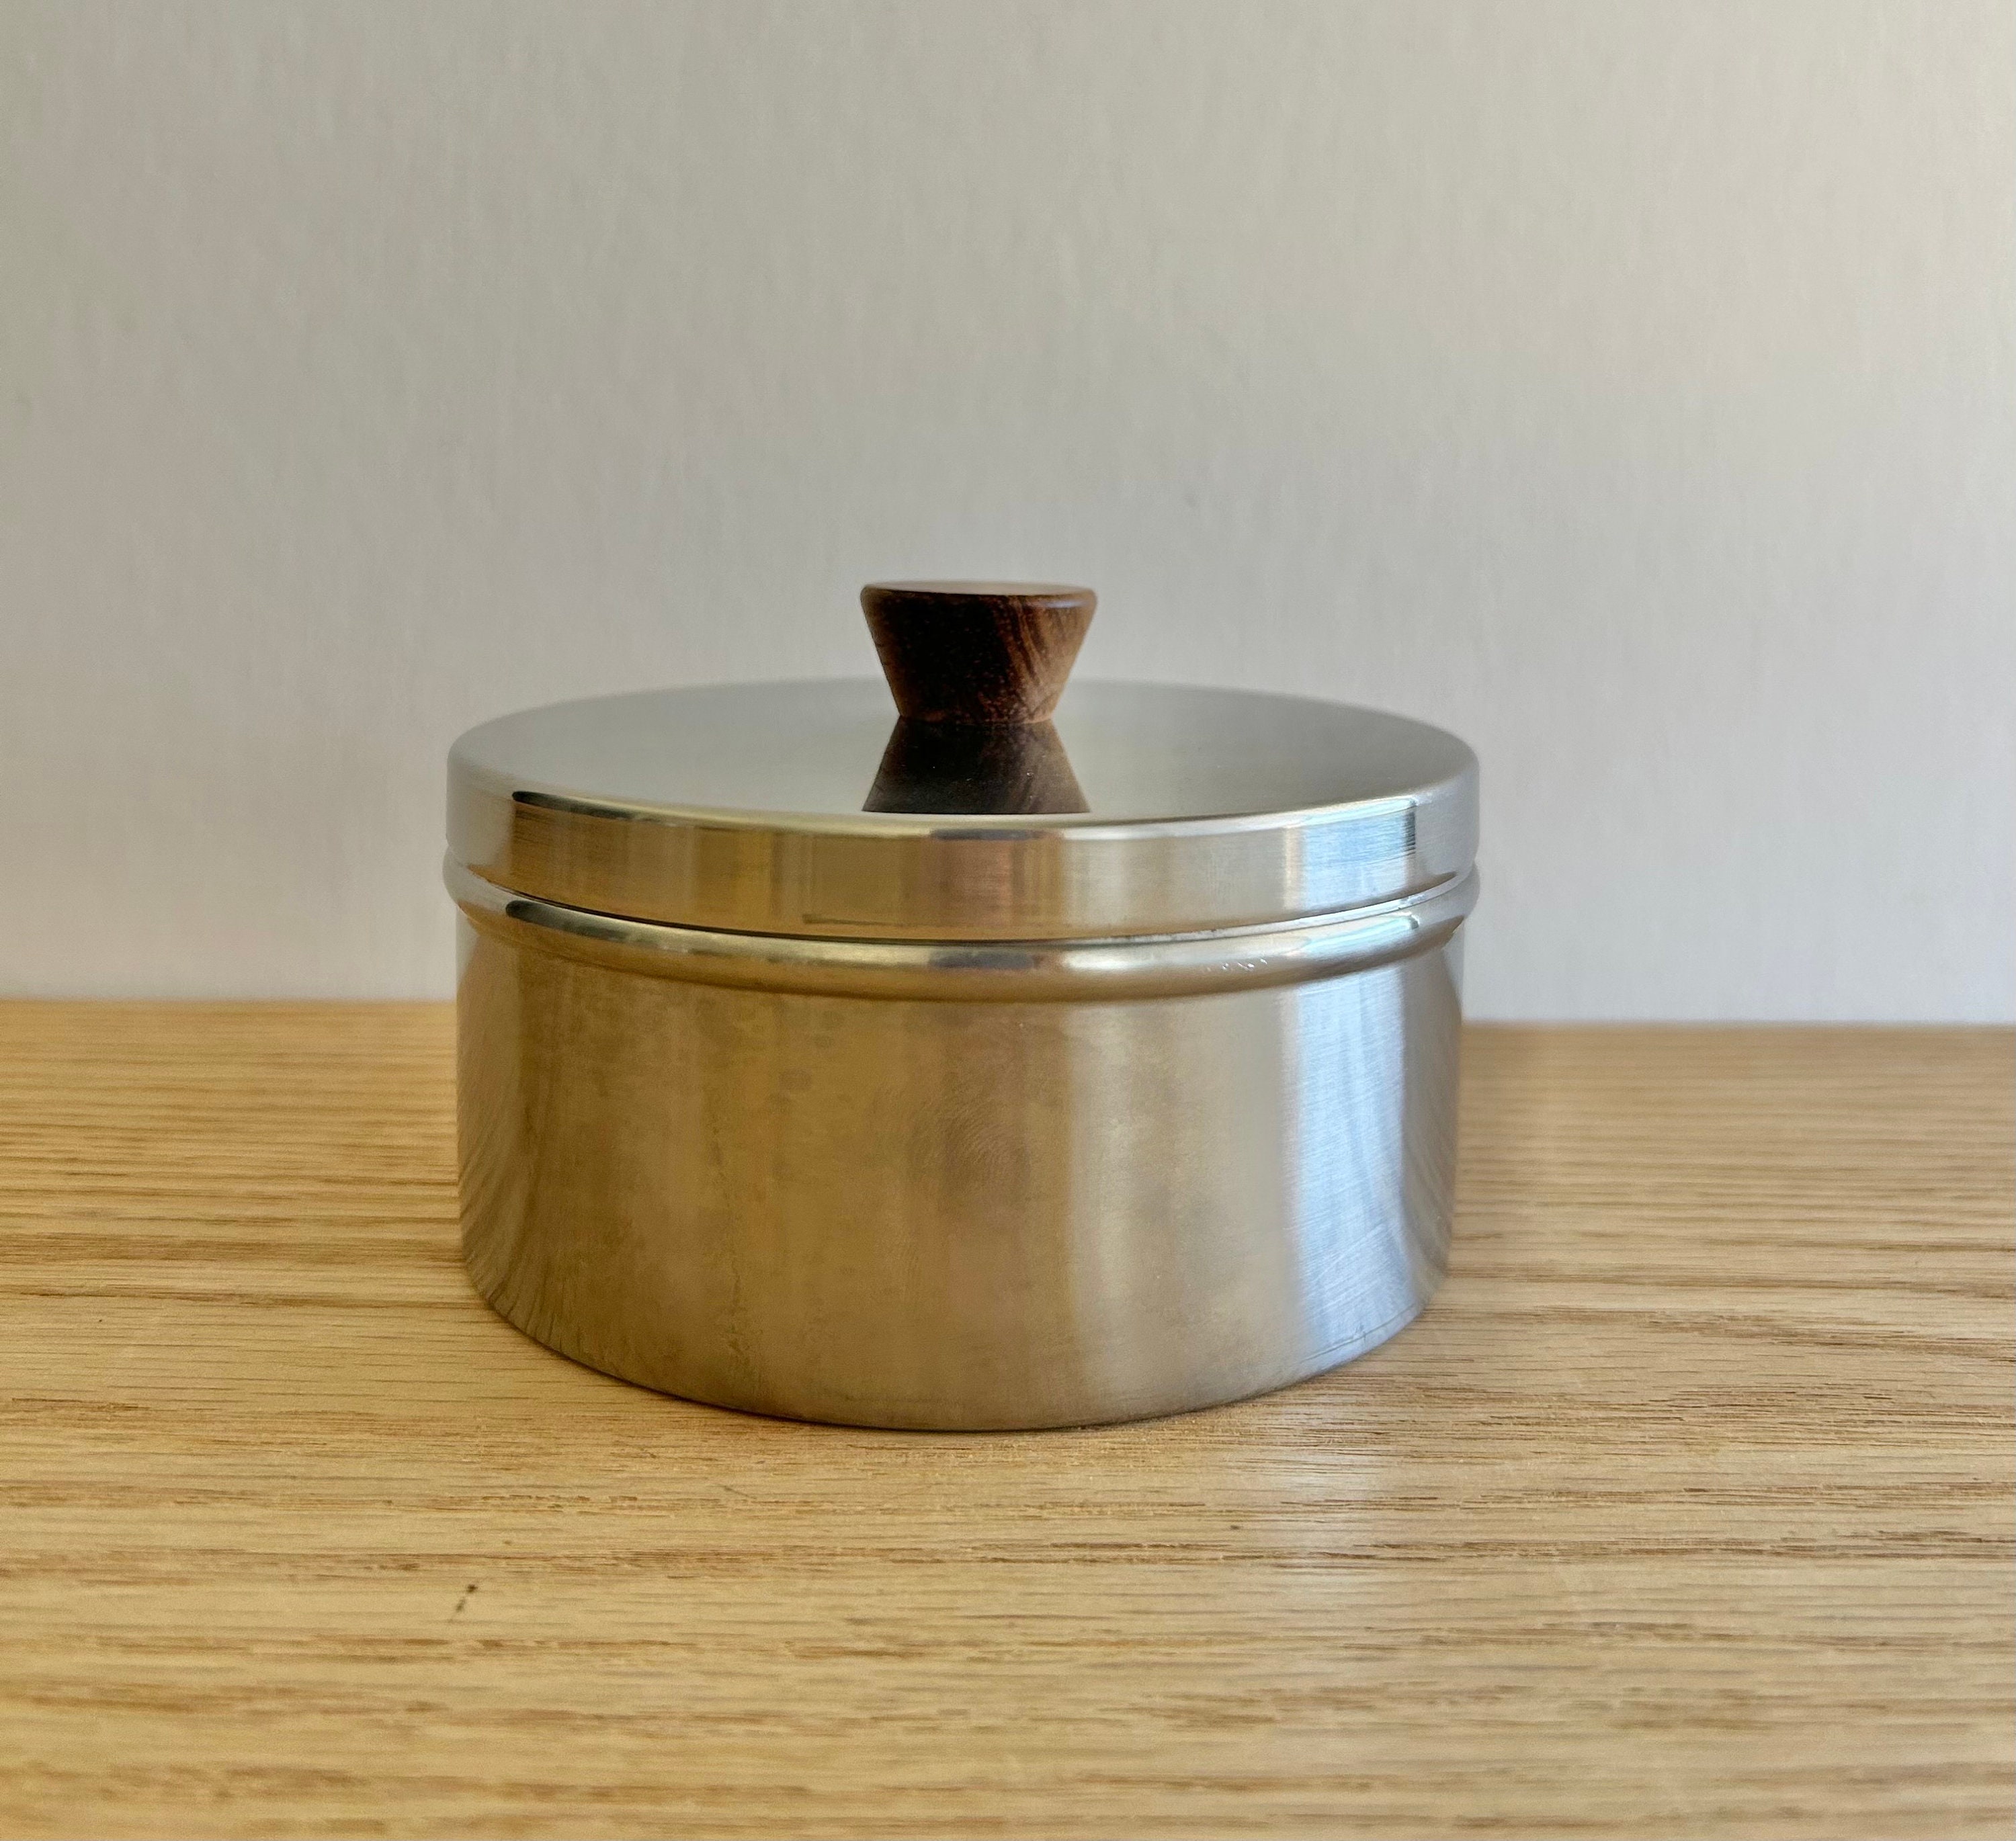 Century Steel Modern - Handle Wood Etsy With Stainless by Danish Mid Lid Sweden Container Lundtofte